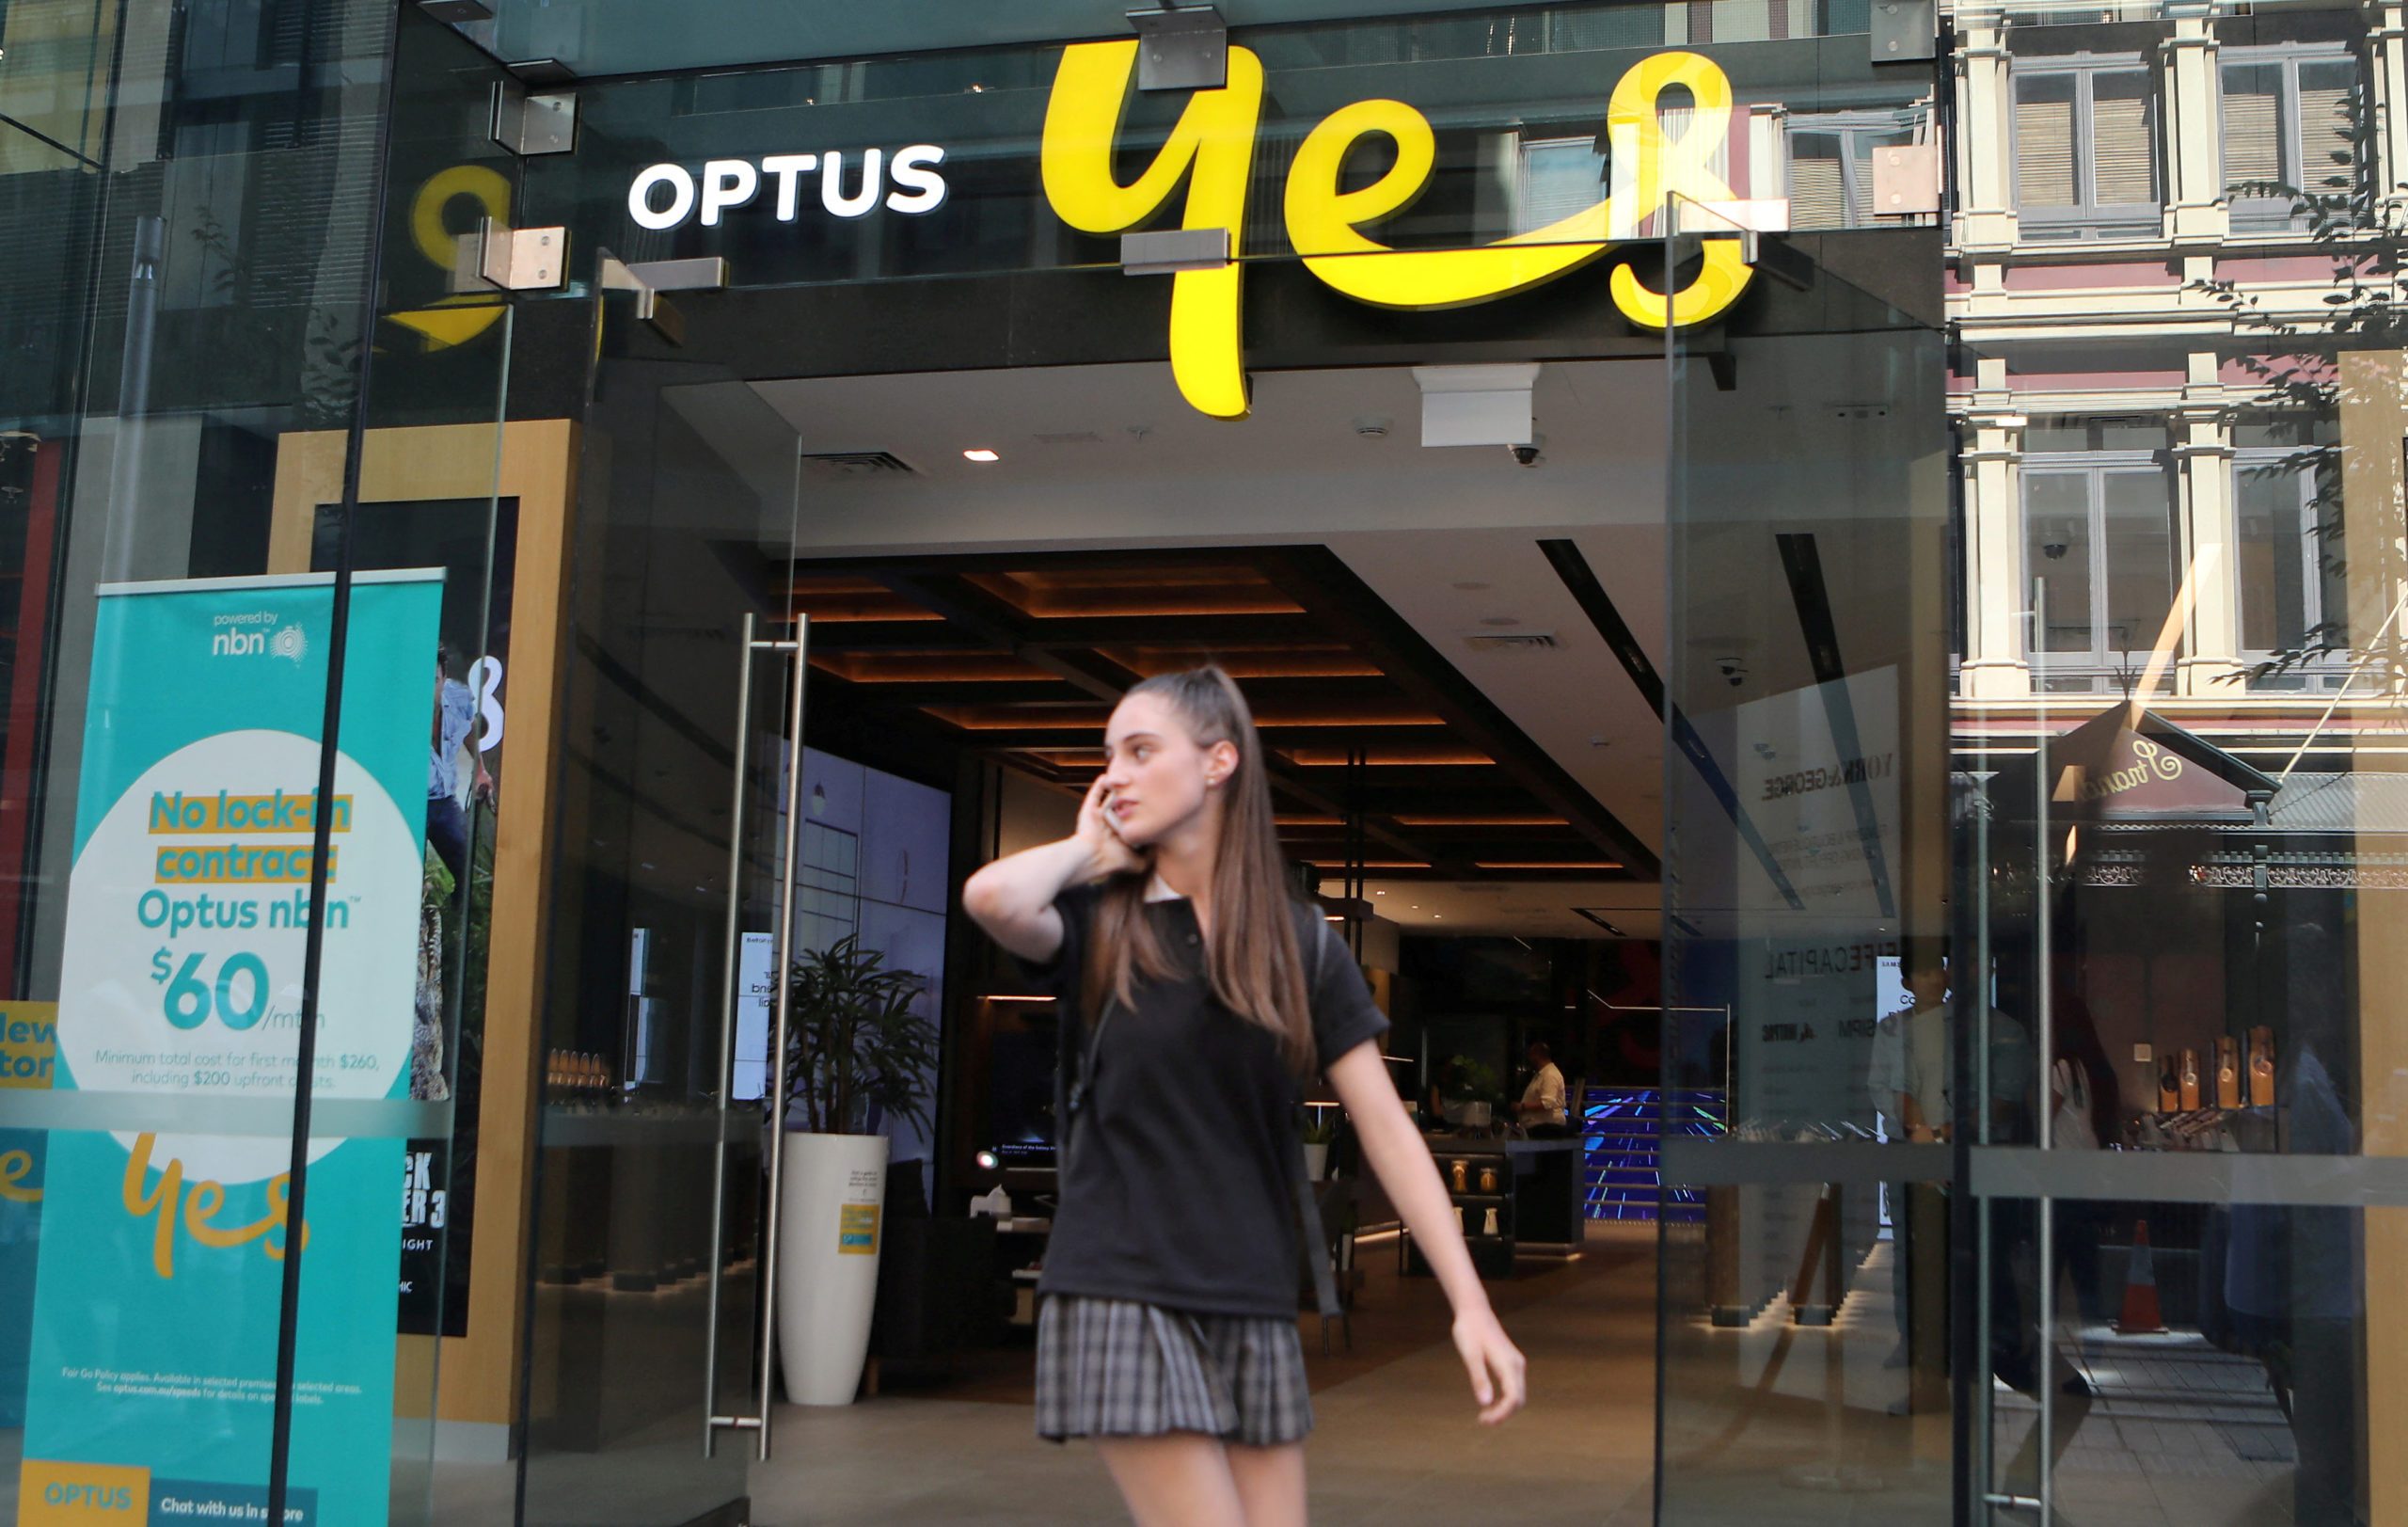 SingTel-owned Australian telecom major Optus says 'deeply sorry' for cyberattack